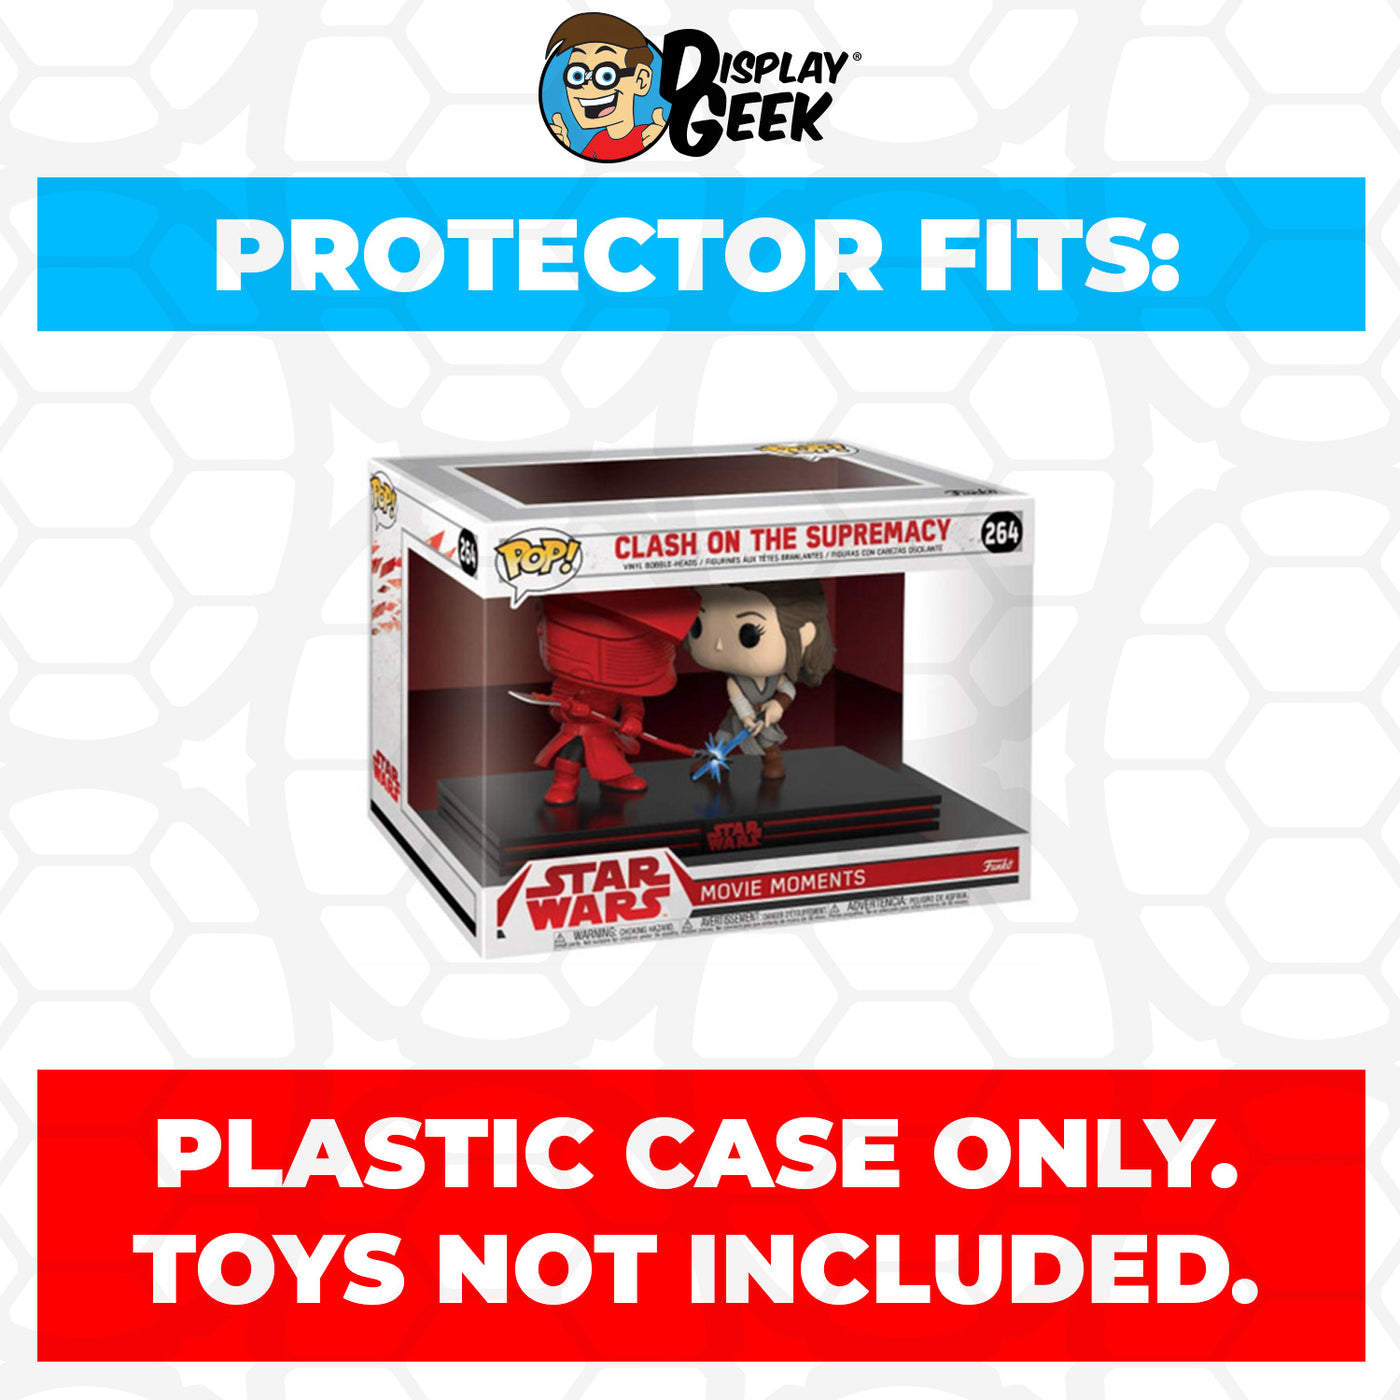 Pop Protector for Clash on the Supremacy Rey #264 Funko Pop Movie Moments on The Protector Guide App by Display Geek